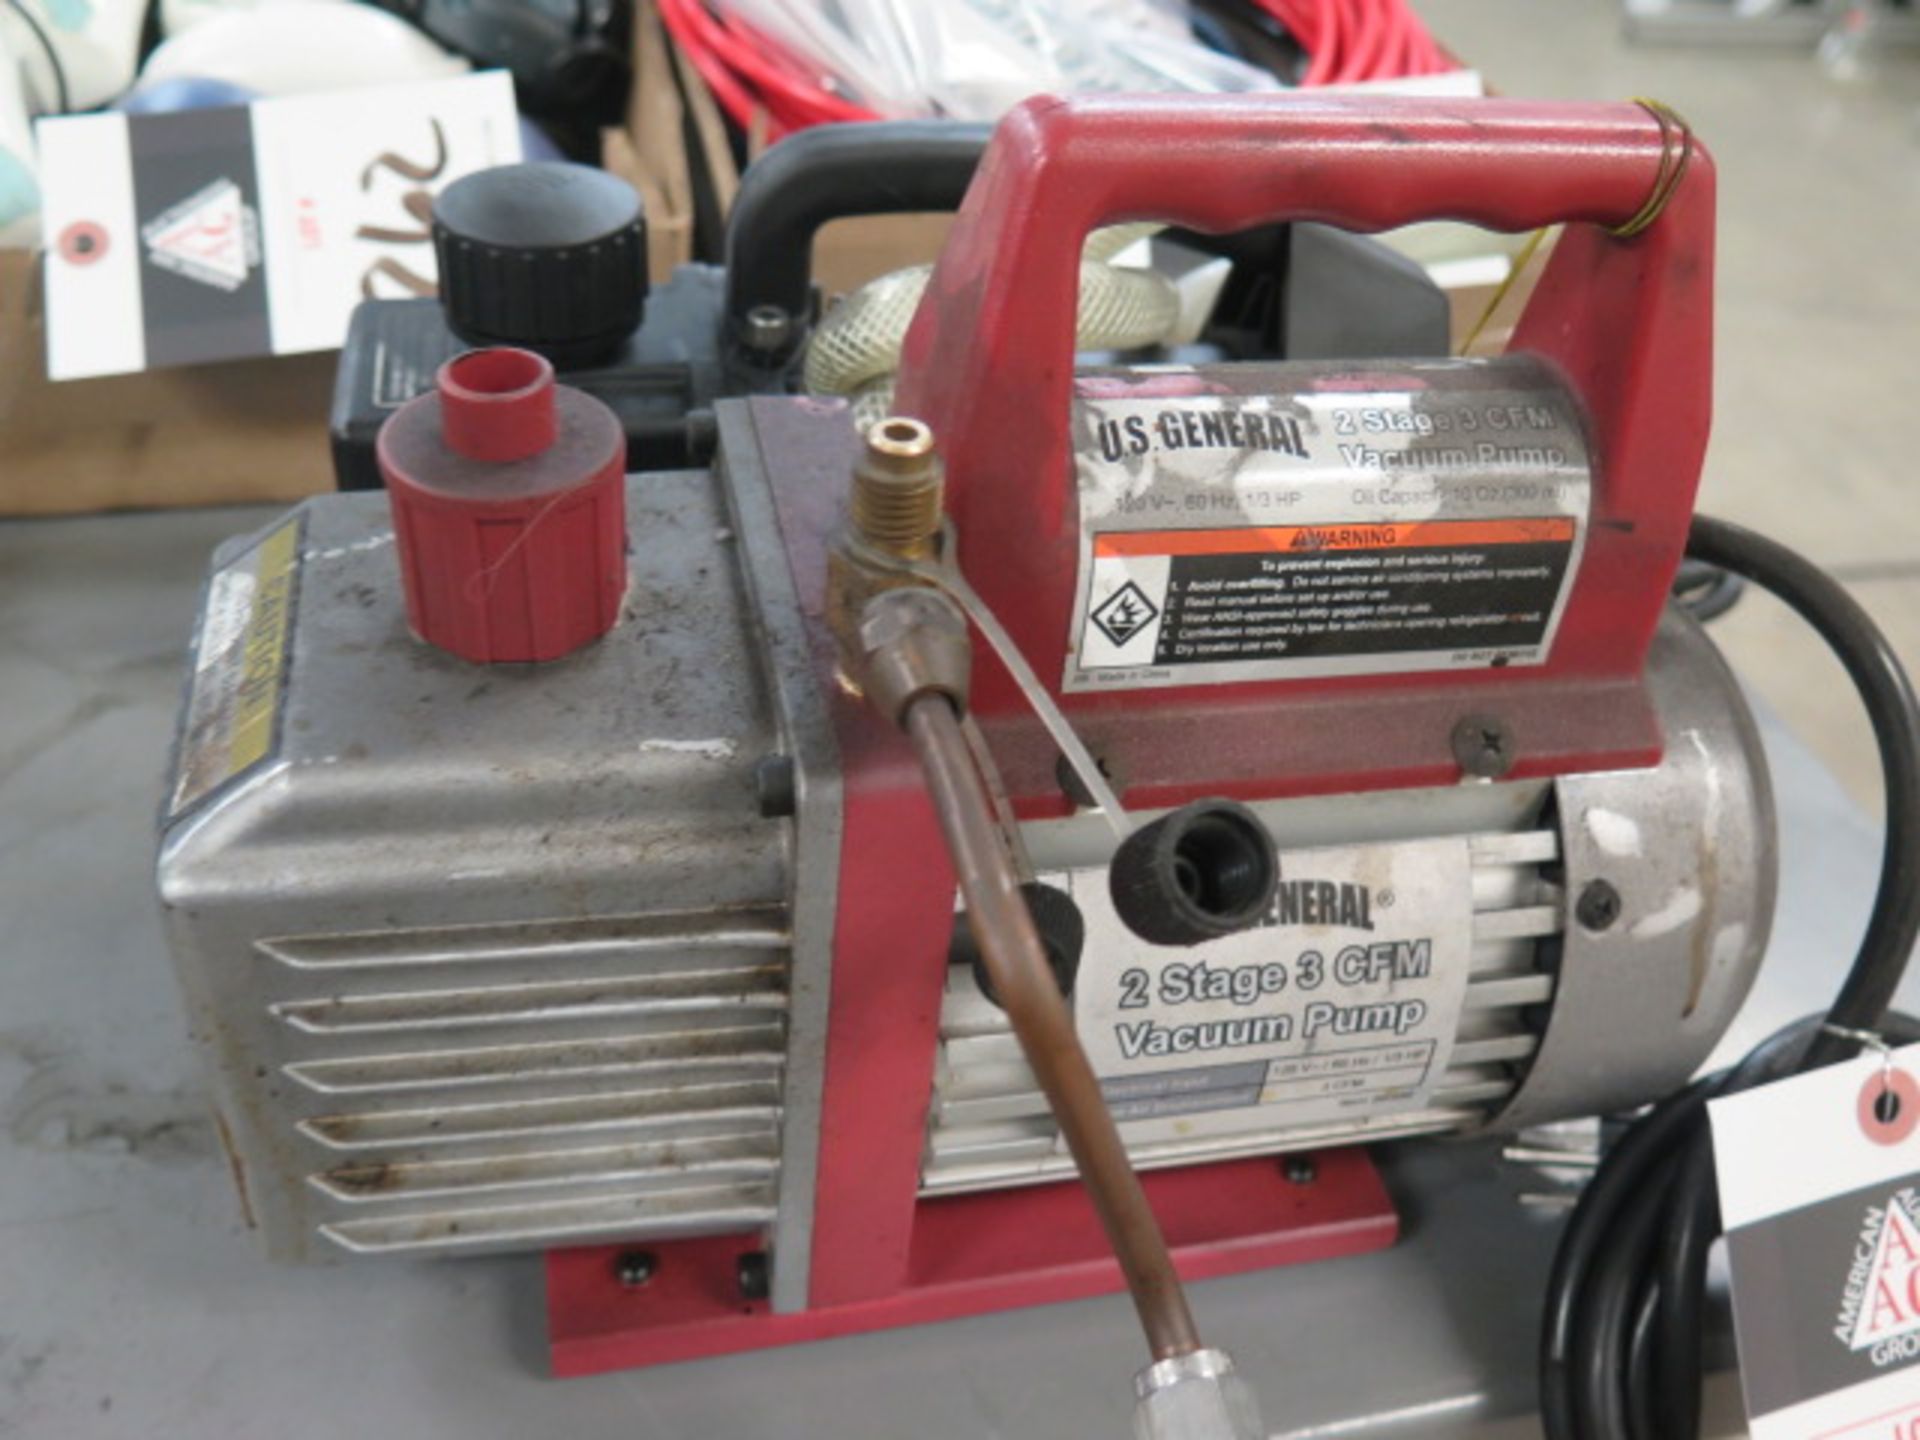 Vacuum Pumps (2), SOLD AS IS AND WITH NO WARRANTY - Image 2 of 3